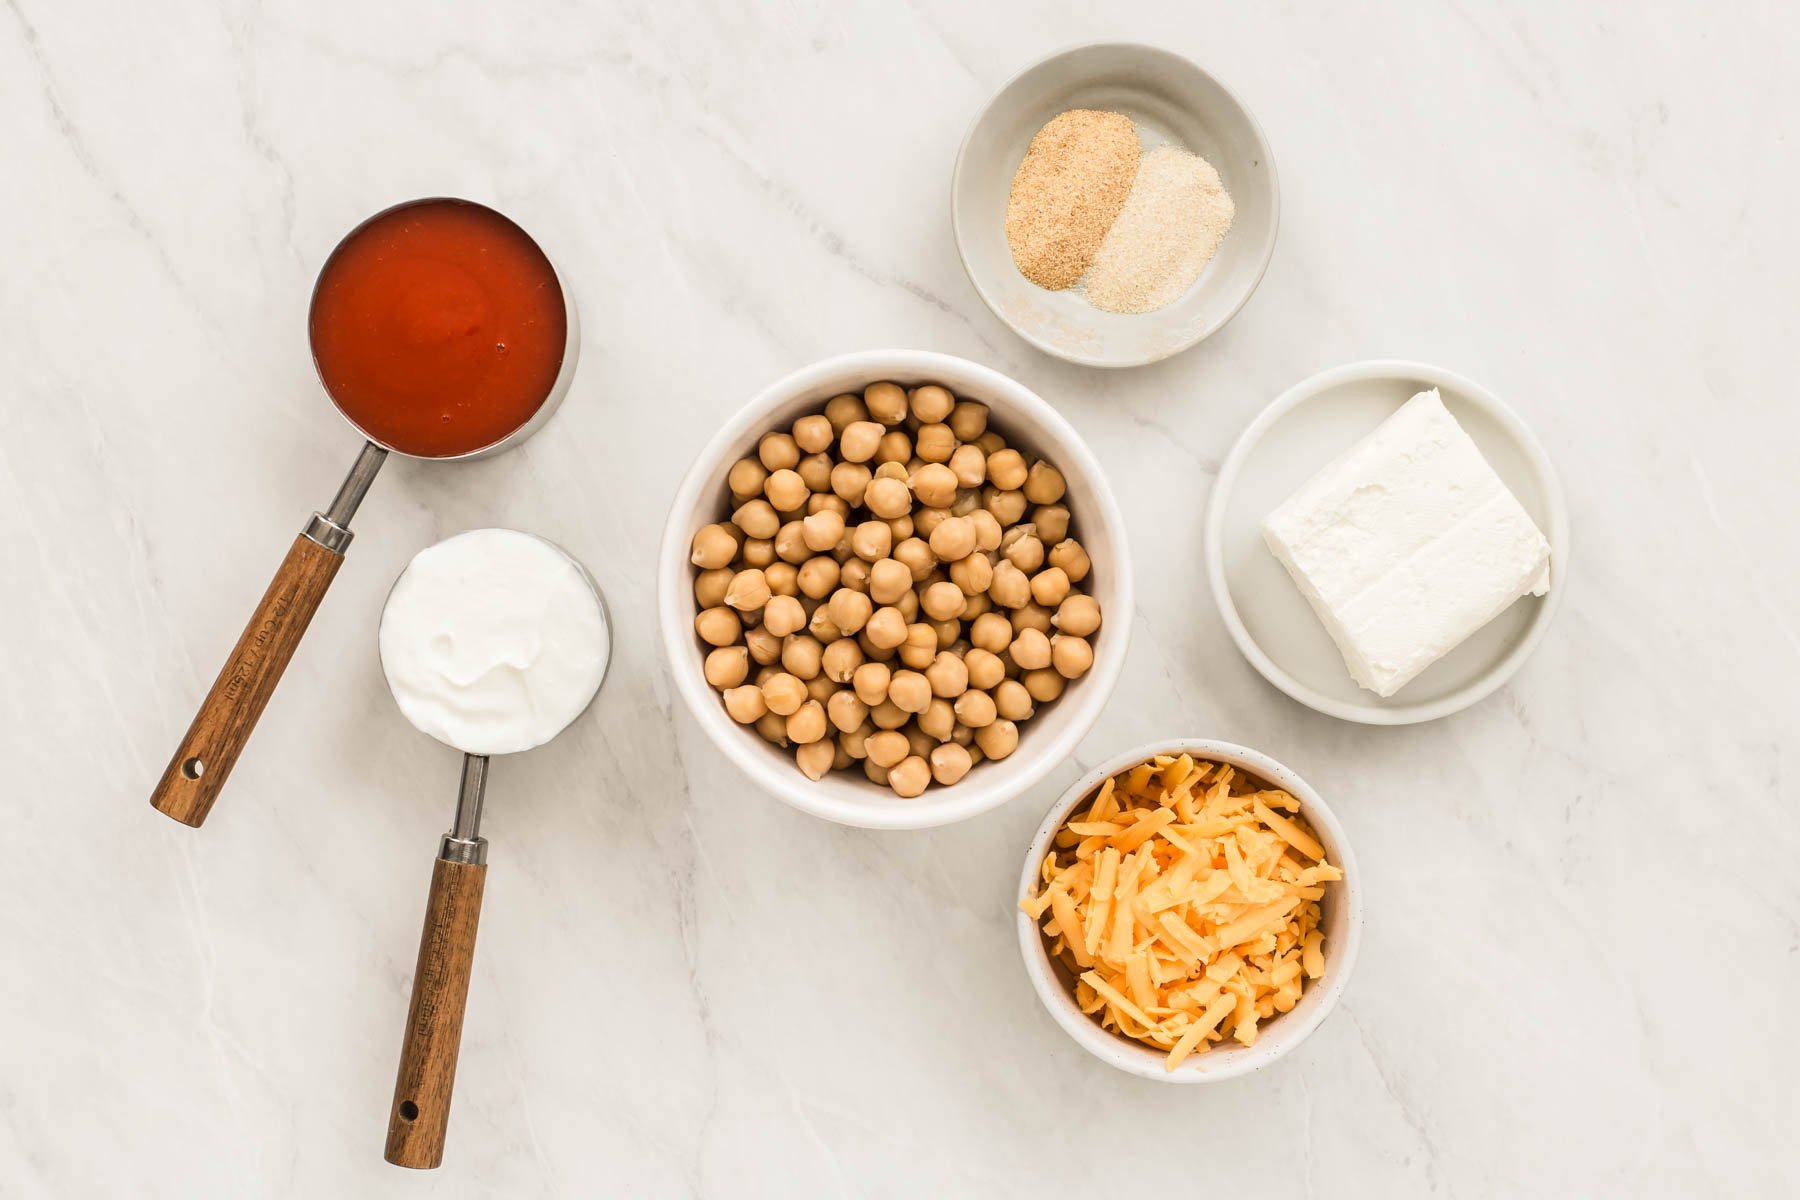 Measuring cups with hot sauce, sour cream, cream cheese and a bowl of chickpeas.